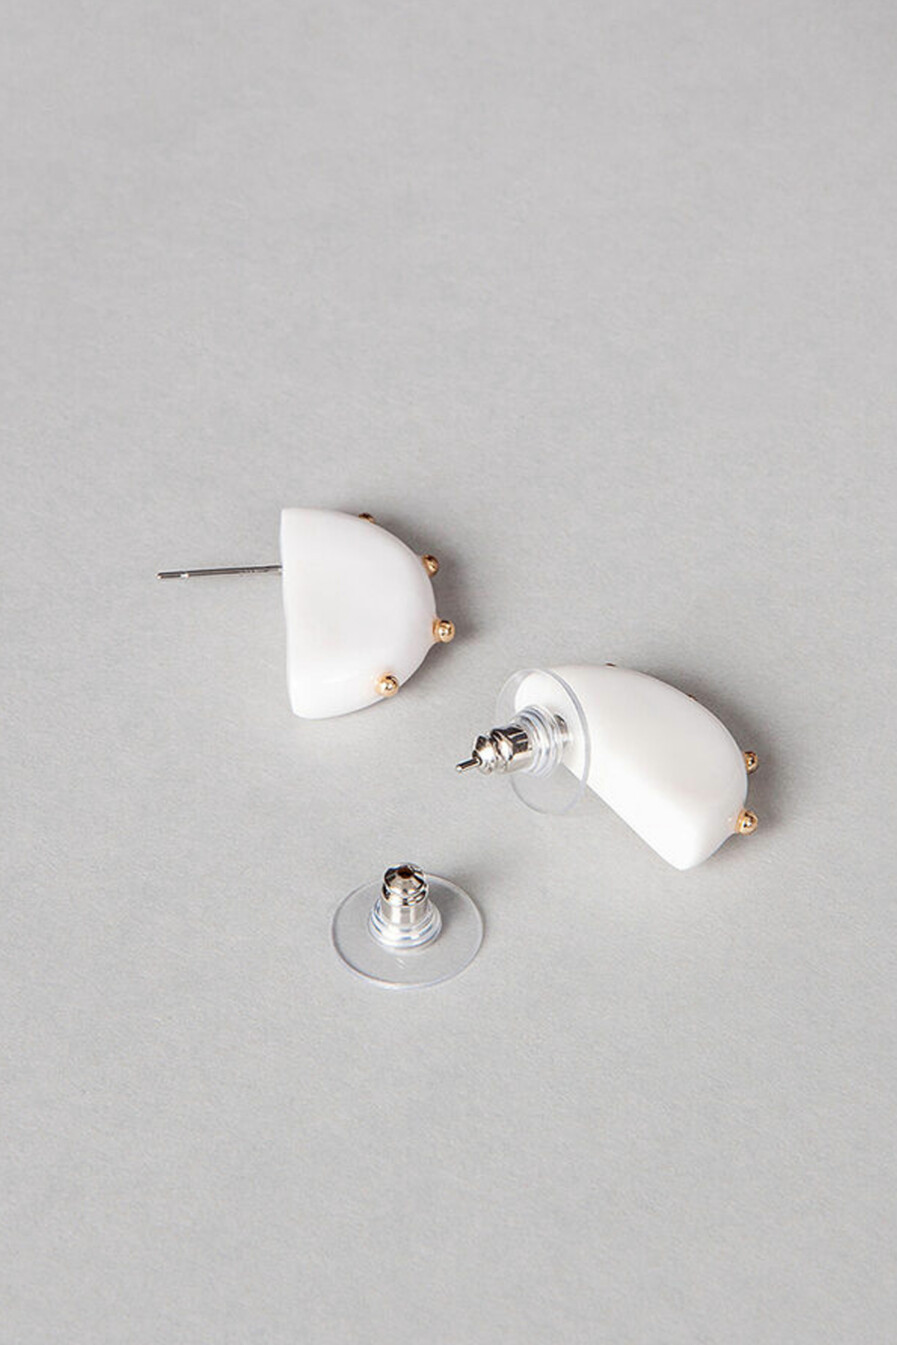 ABE Earrings semicircle white with gold accents